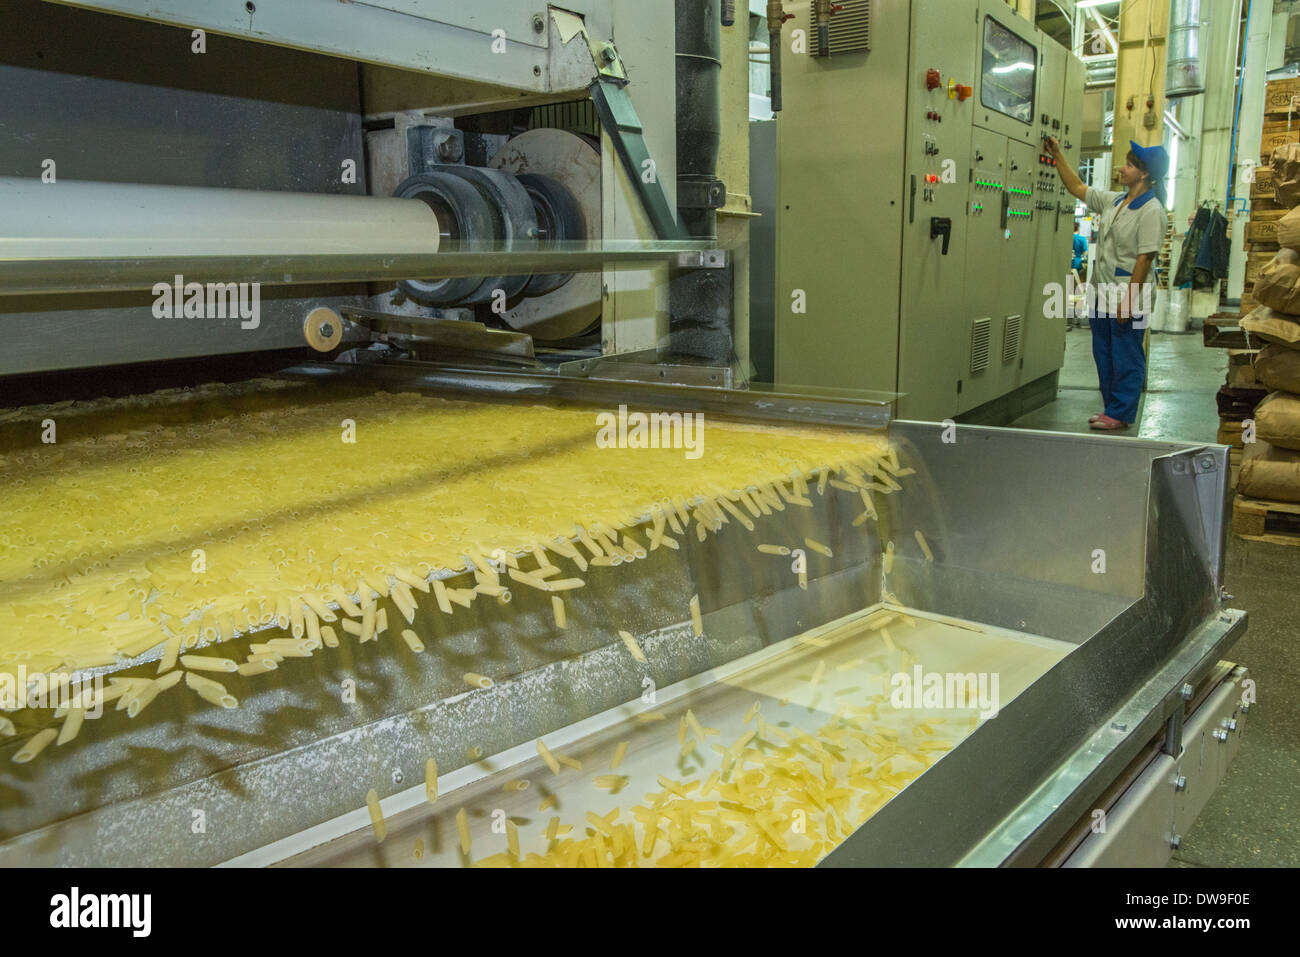 Macaroni Pasta production food manufacturing industry Stock Photo